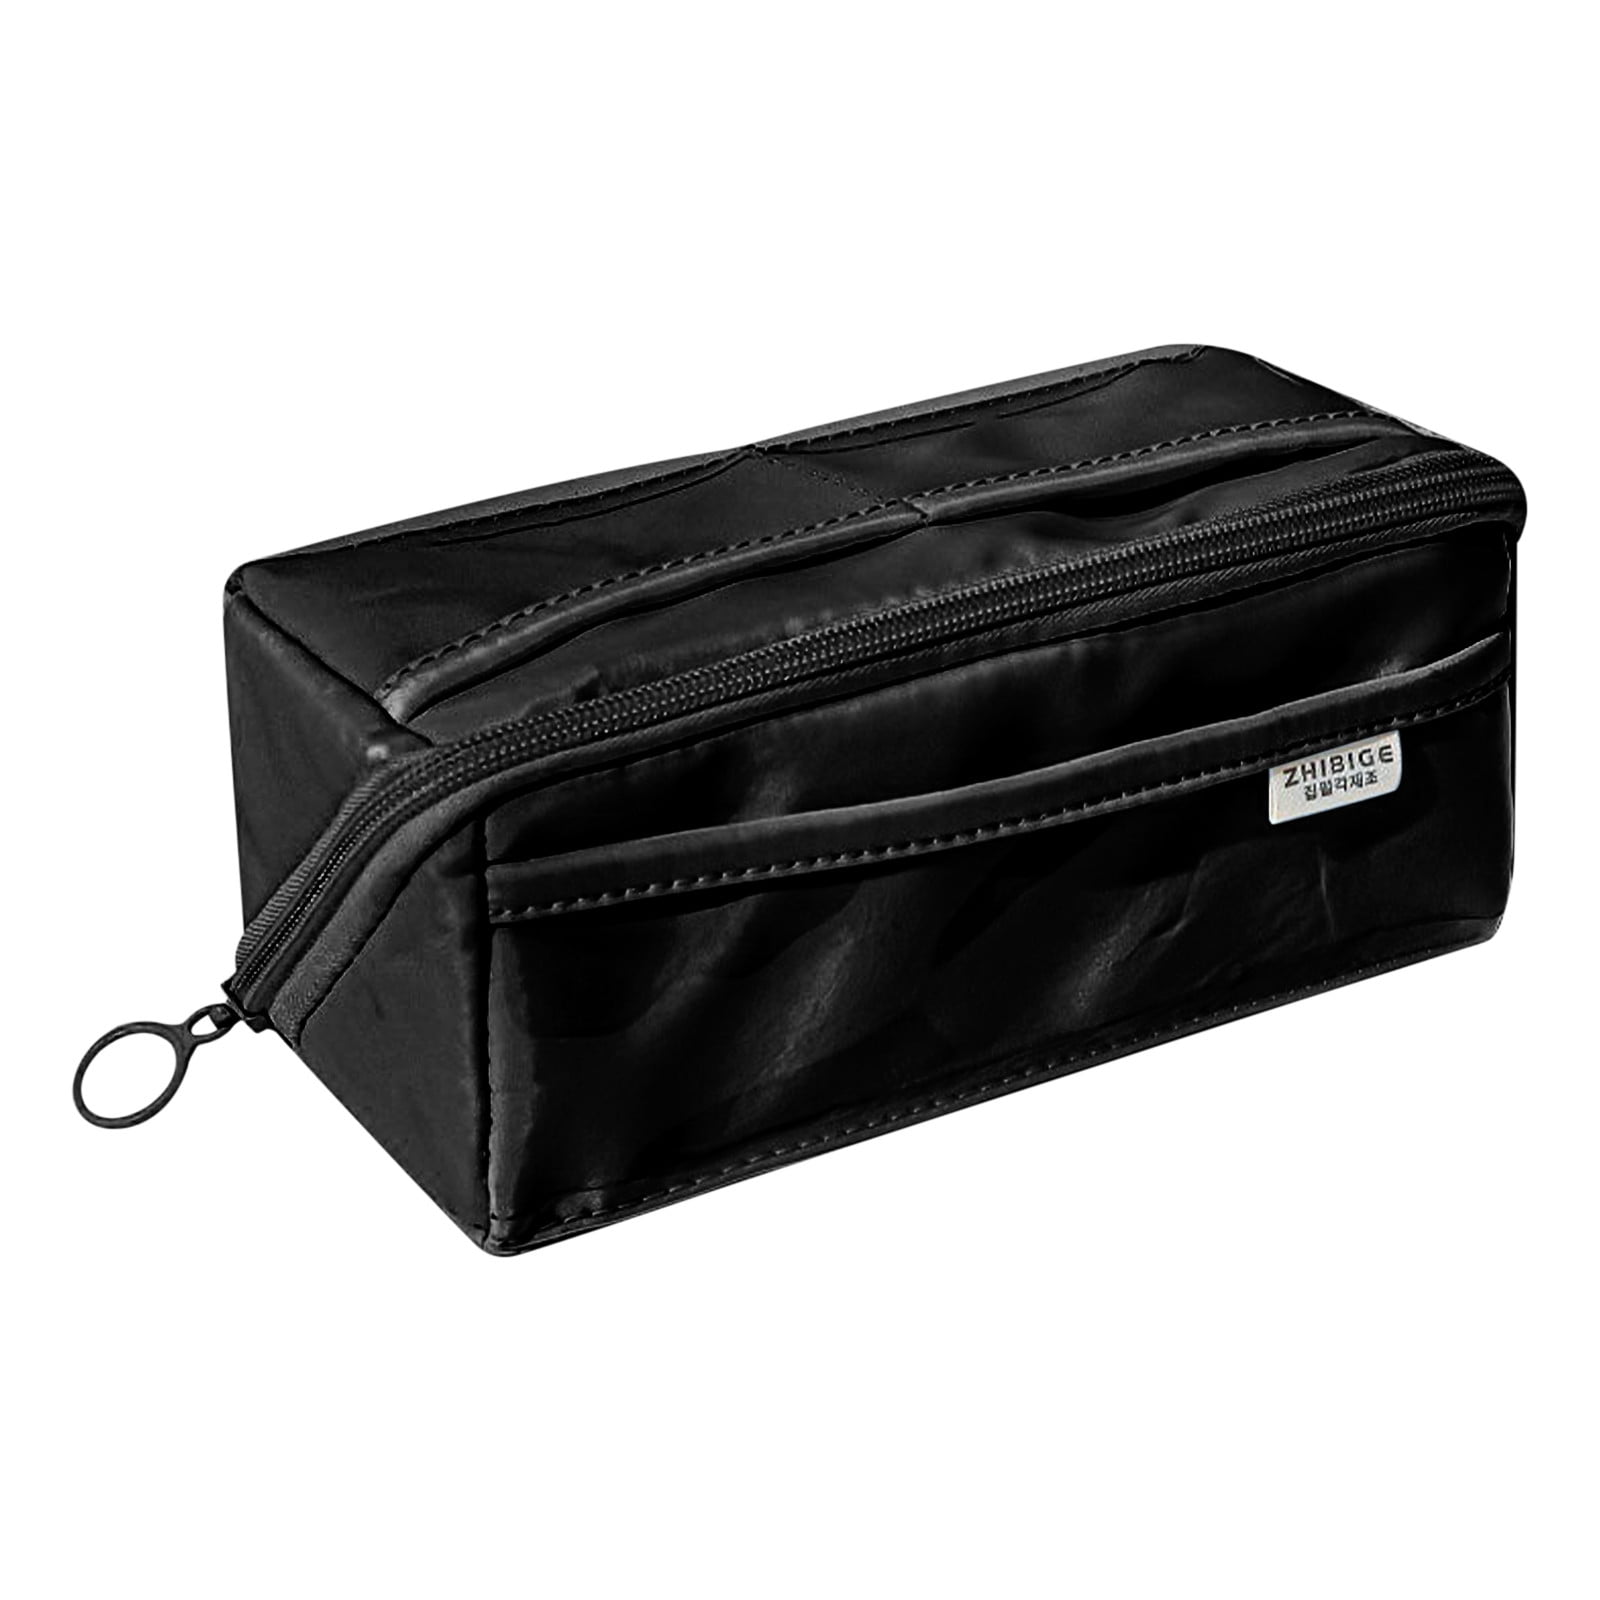 Fmeida Pencil Case Black PU Leather Extra Large Pencil Case Big Capacity  Pencil Bag Soft Pencil Cases With Handle Portable Pencil Boxes Aesthetic